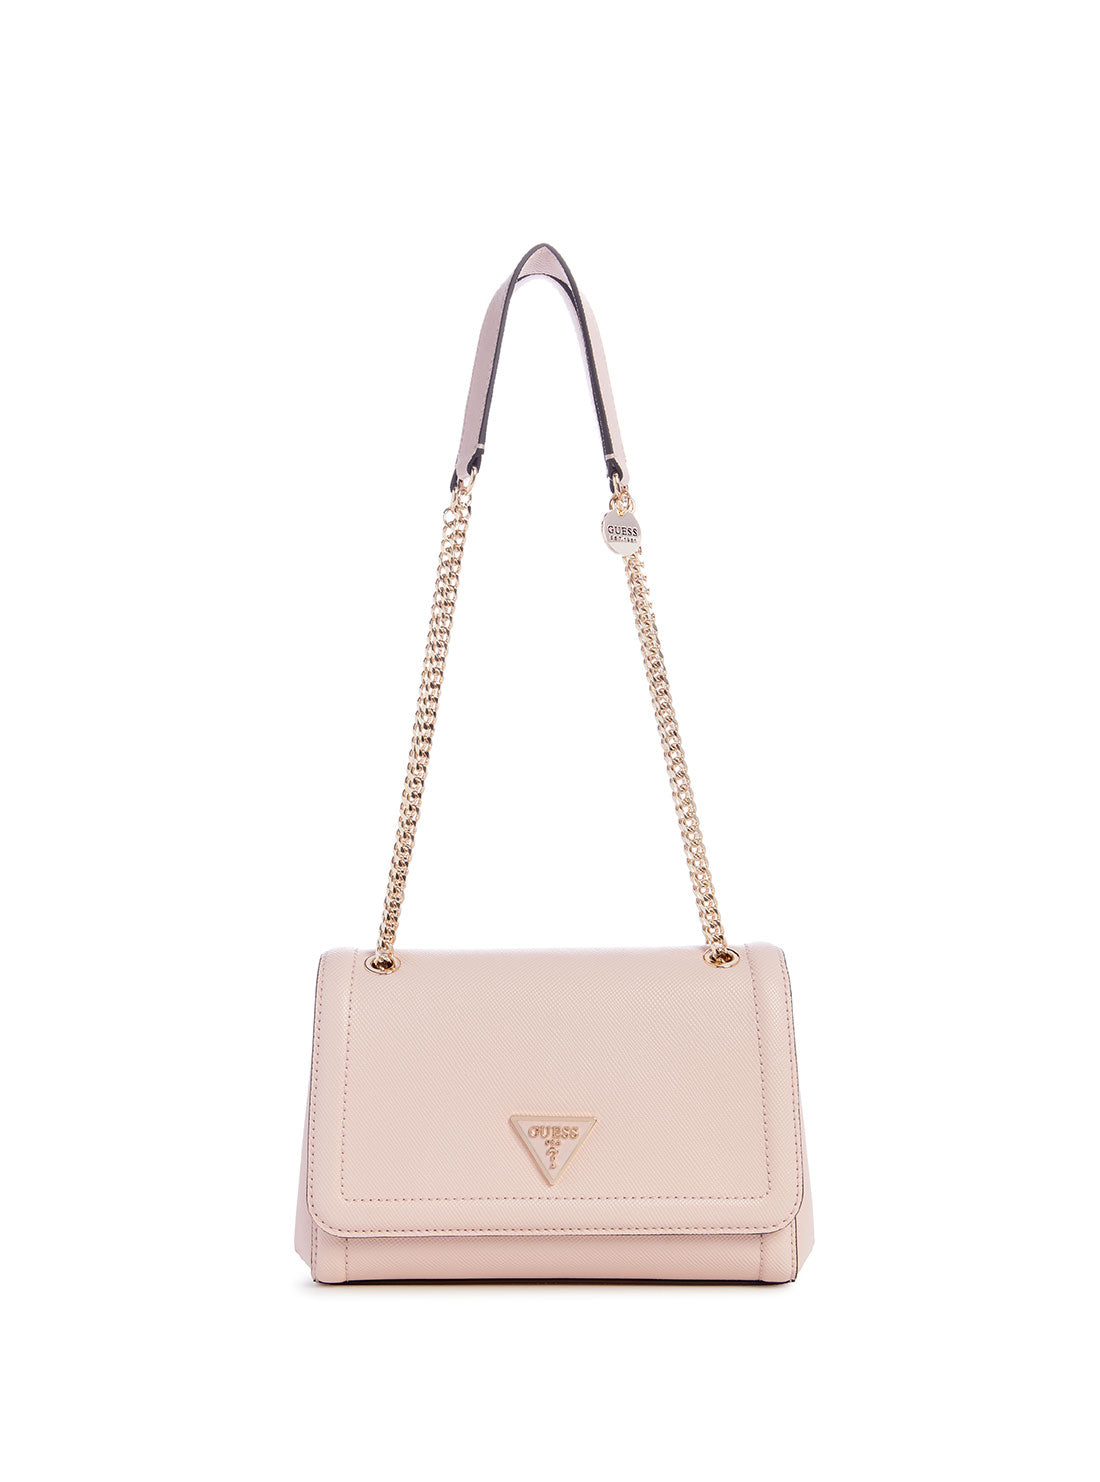 GUESS Pink Noelle Crossbody Flap Bag front view